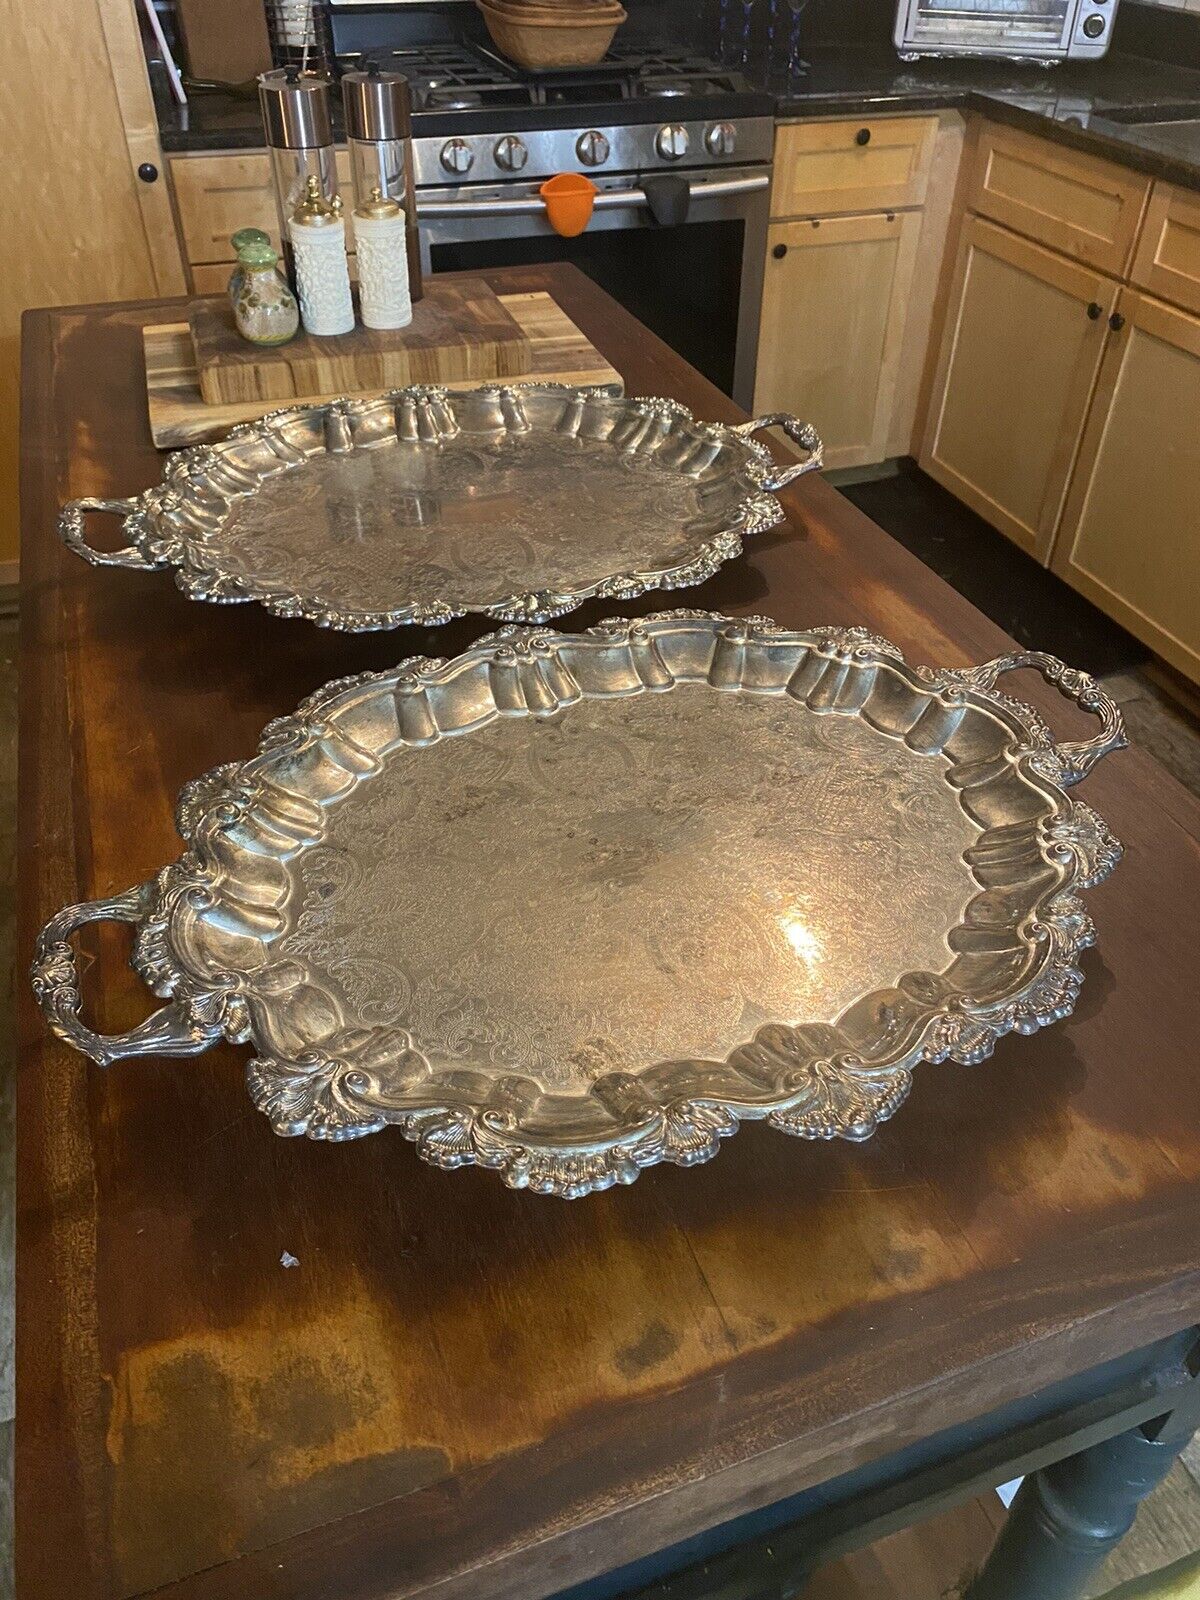 Lot 2 Wm. Rogers Silverplated Chippendale Footed Tray w/Handles 22 3/4 x 16 1/4\